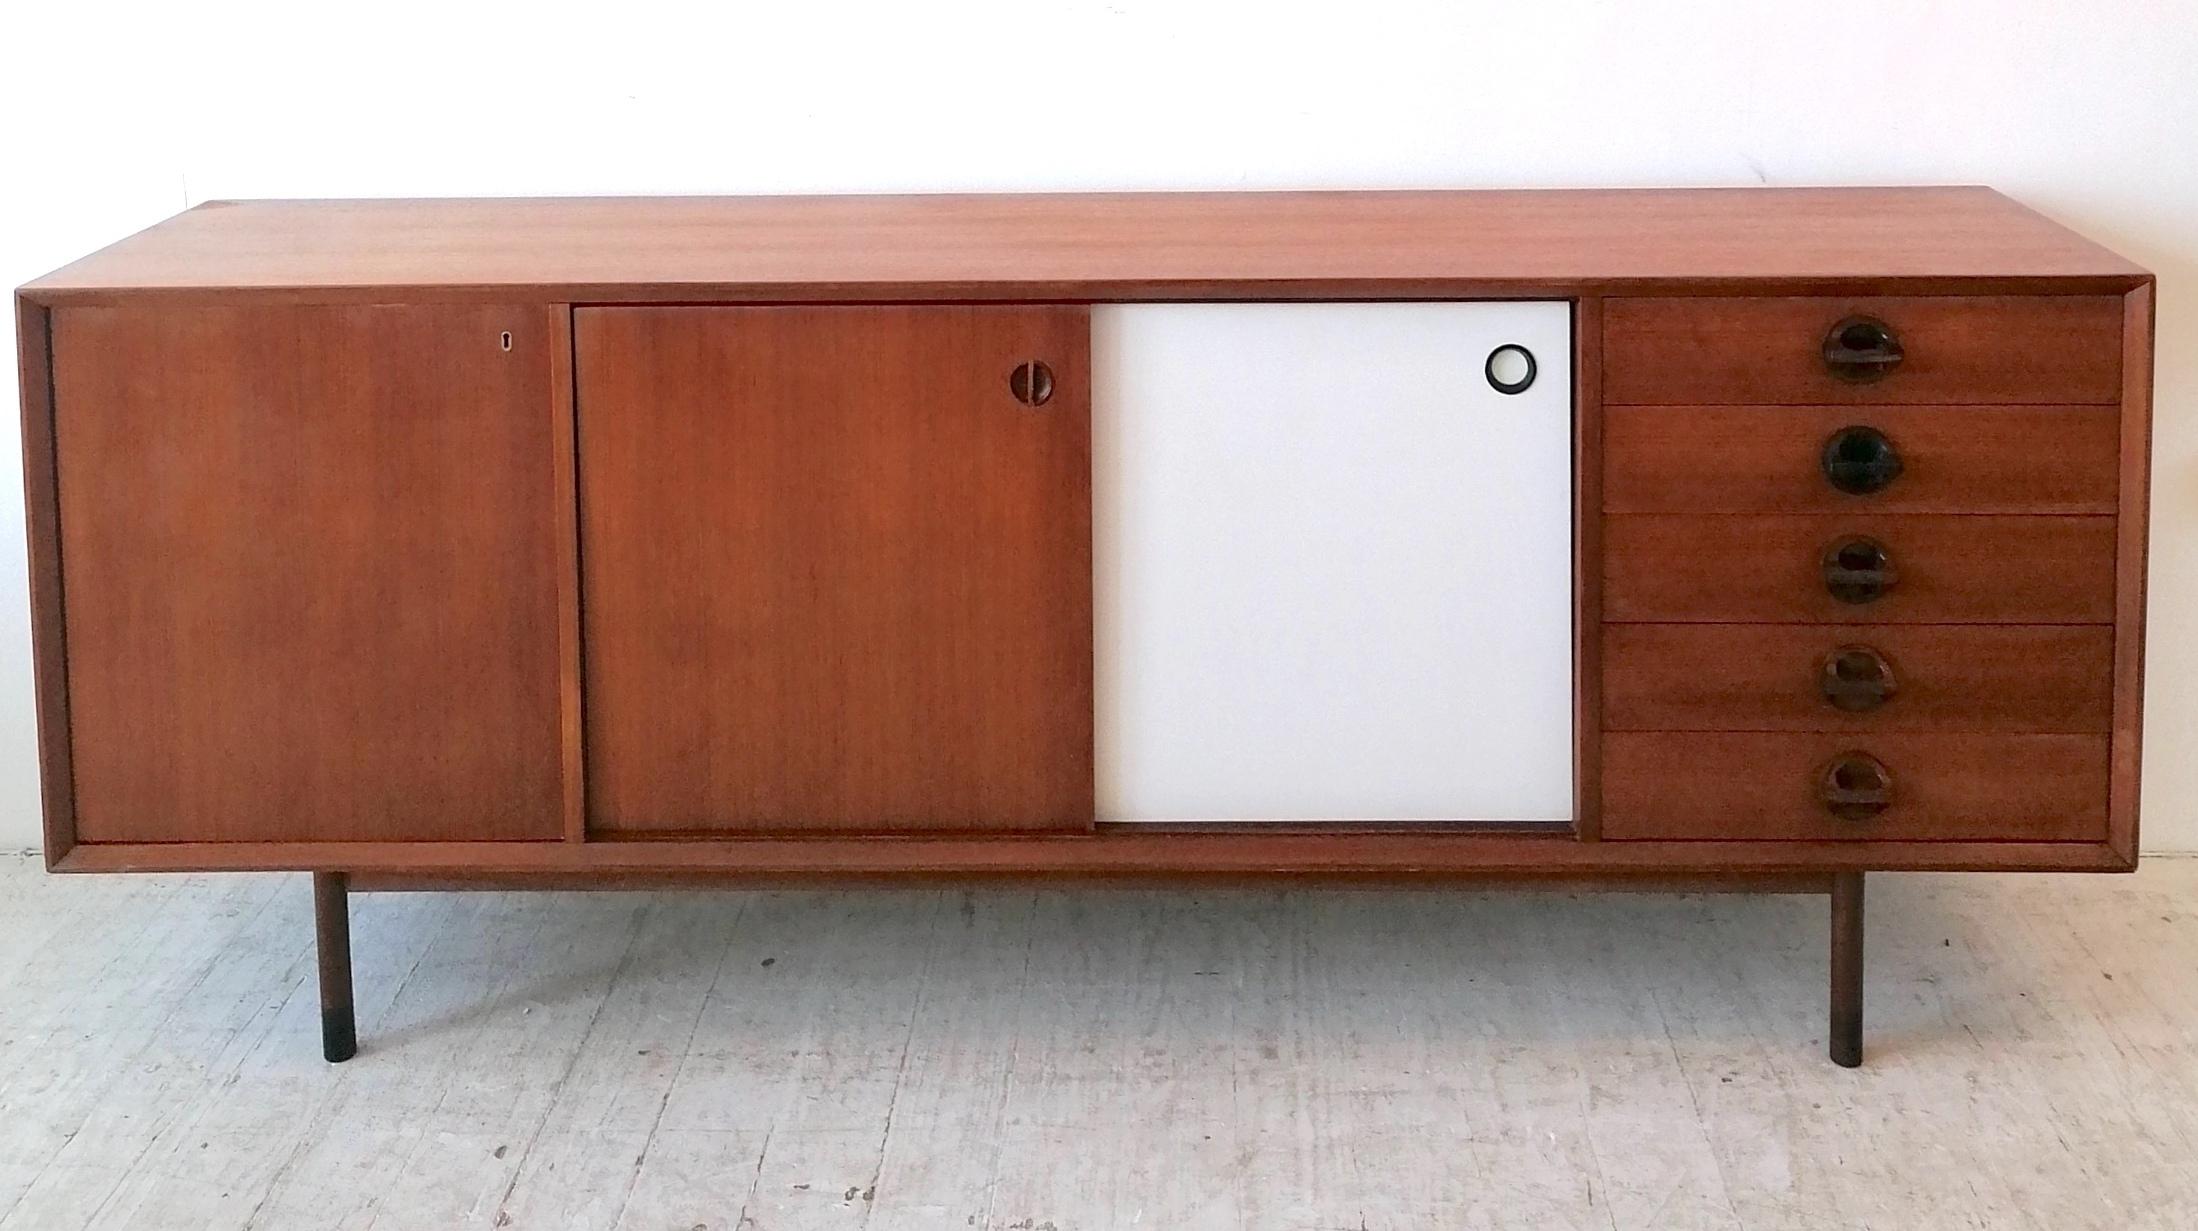 A sleek mid century 1960s Italian 'Monika' sideboard by Faram. Teak veneer with two reversible sliding doors. Indented door pulls. Drawer pulls are sculpted solid wood. The reverse side of the sliding doors is white laminate with inset ebonised wood